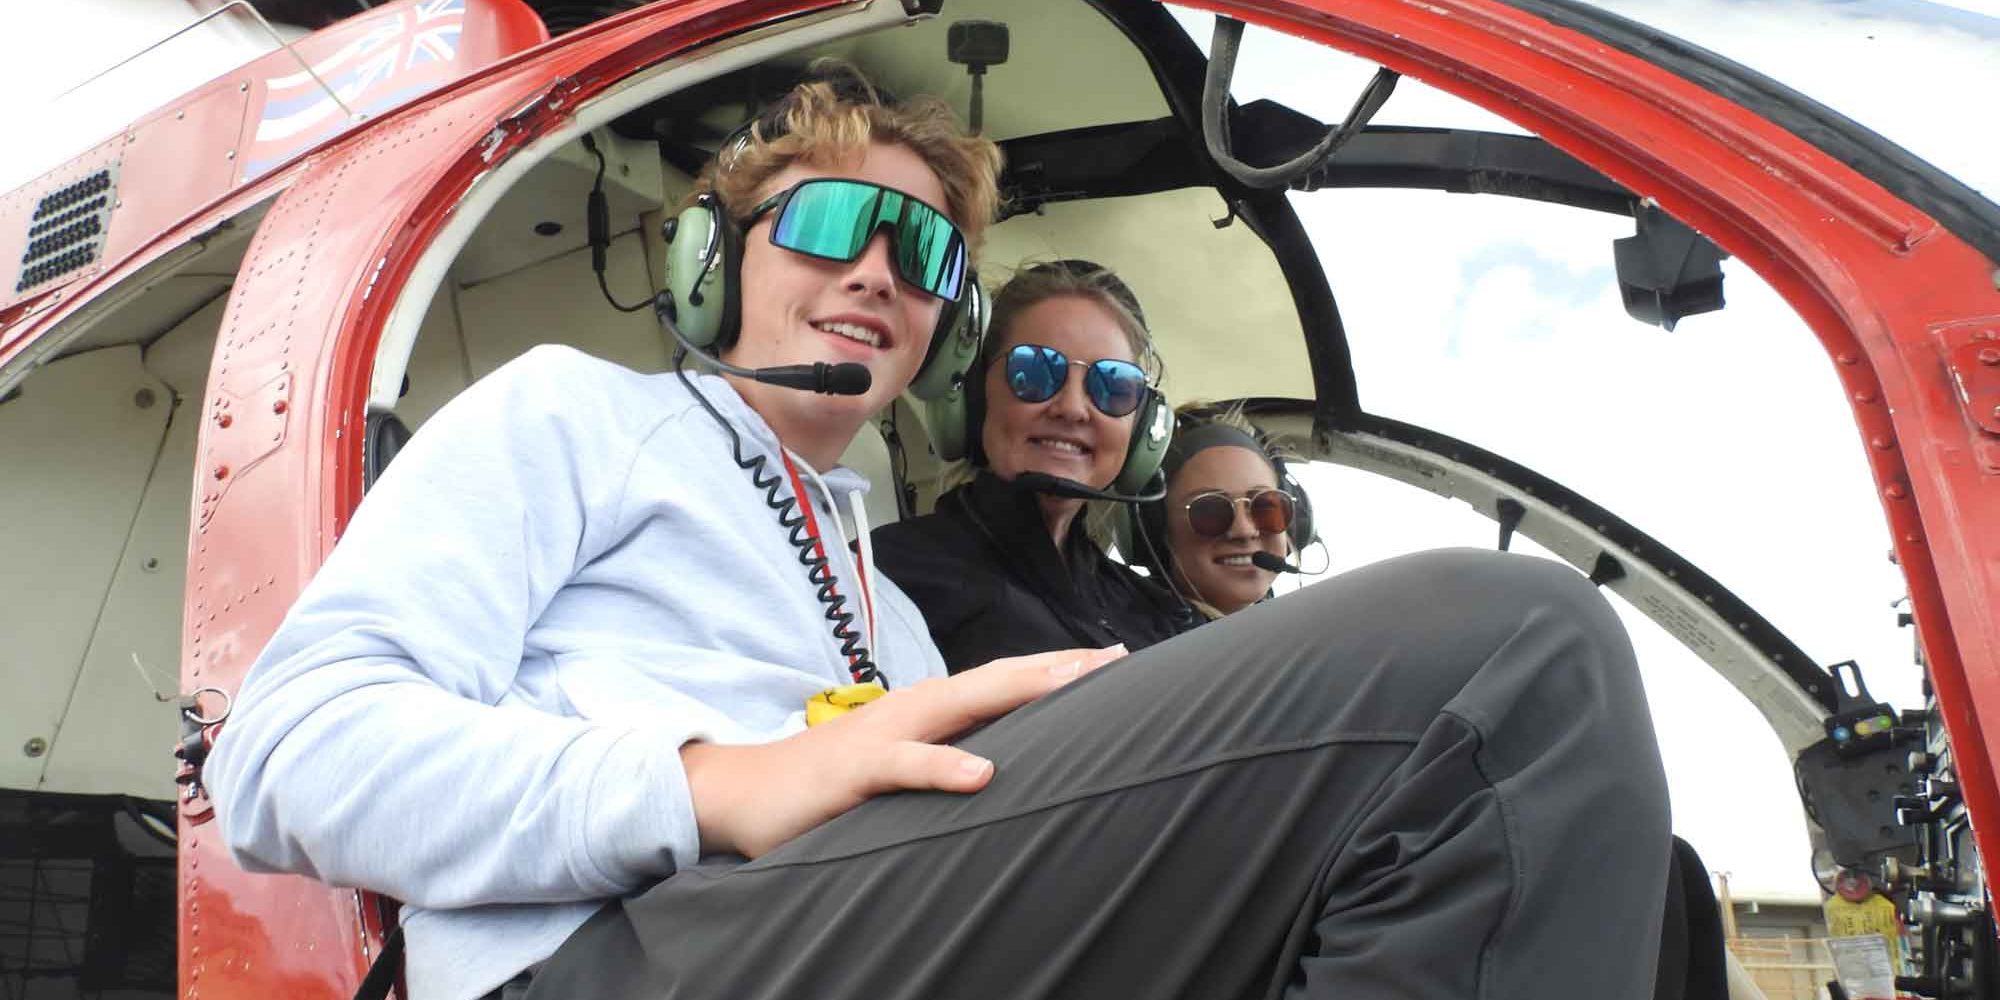 Helicopter Passengers and Pilot